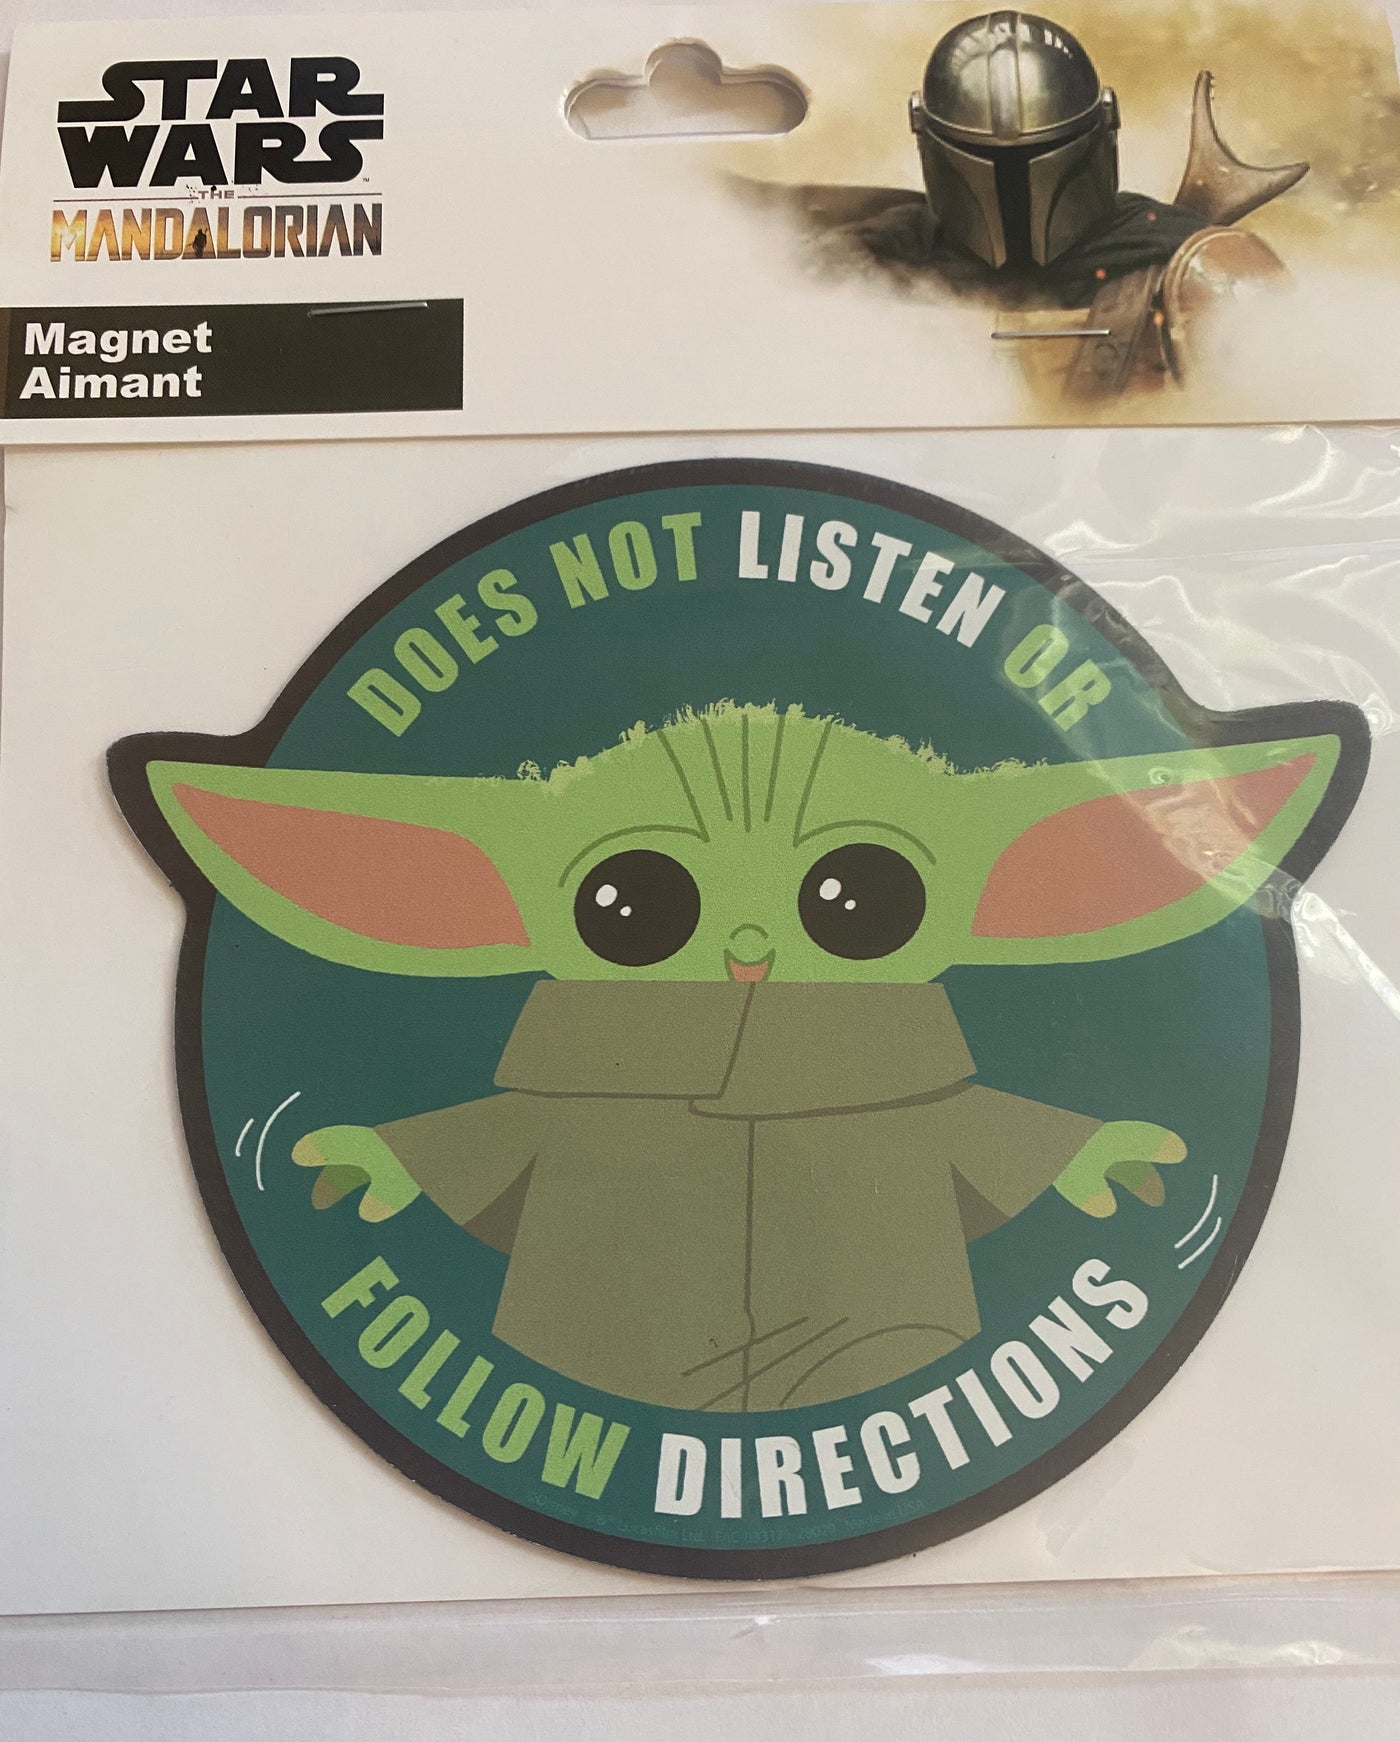 Disney Star Wars The Mandalorian Does Not Listen or Follow Directions Magnet New